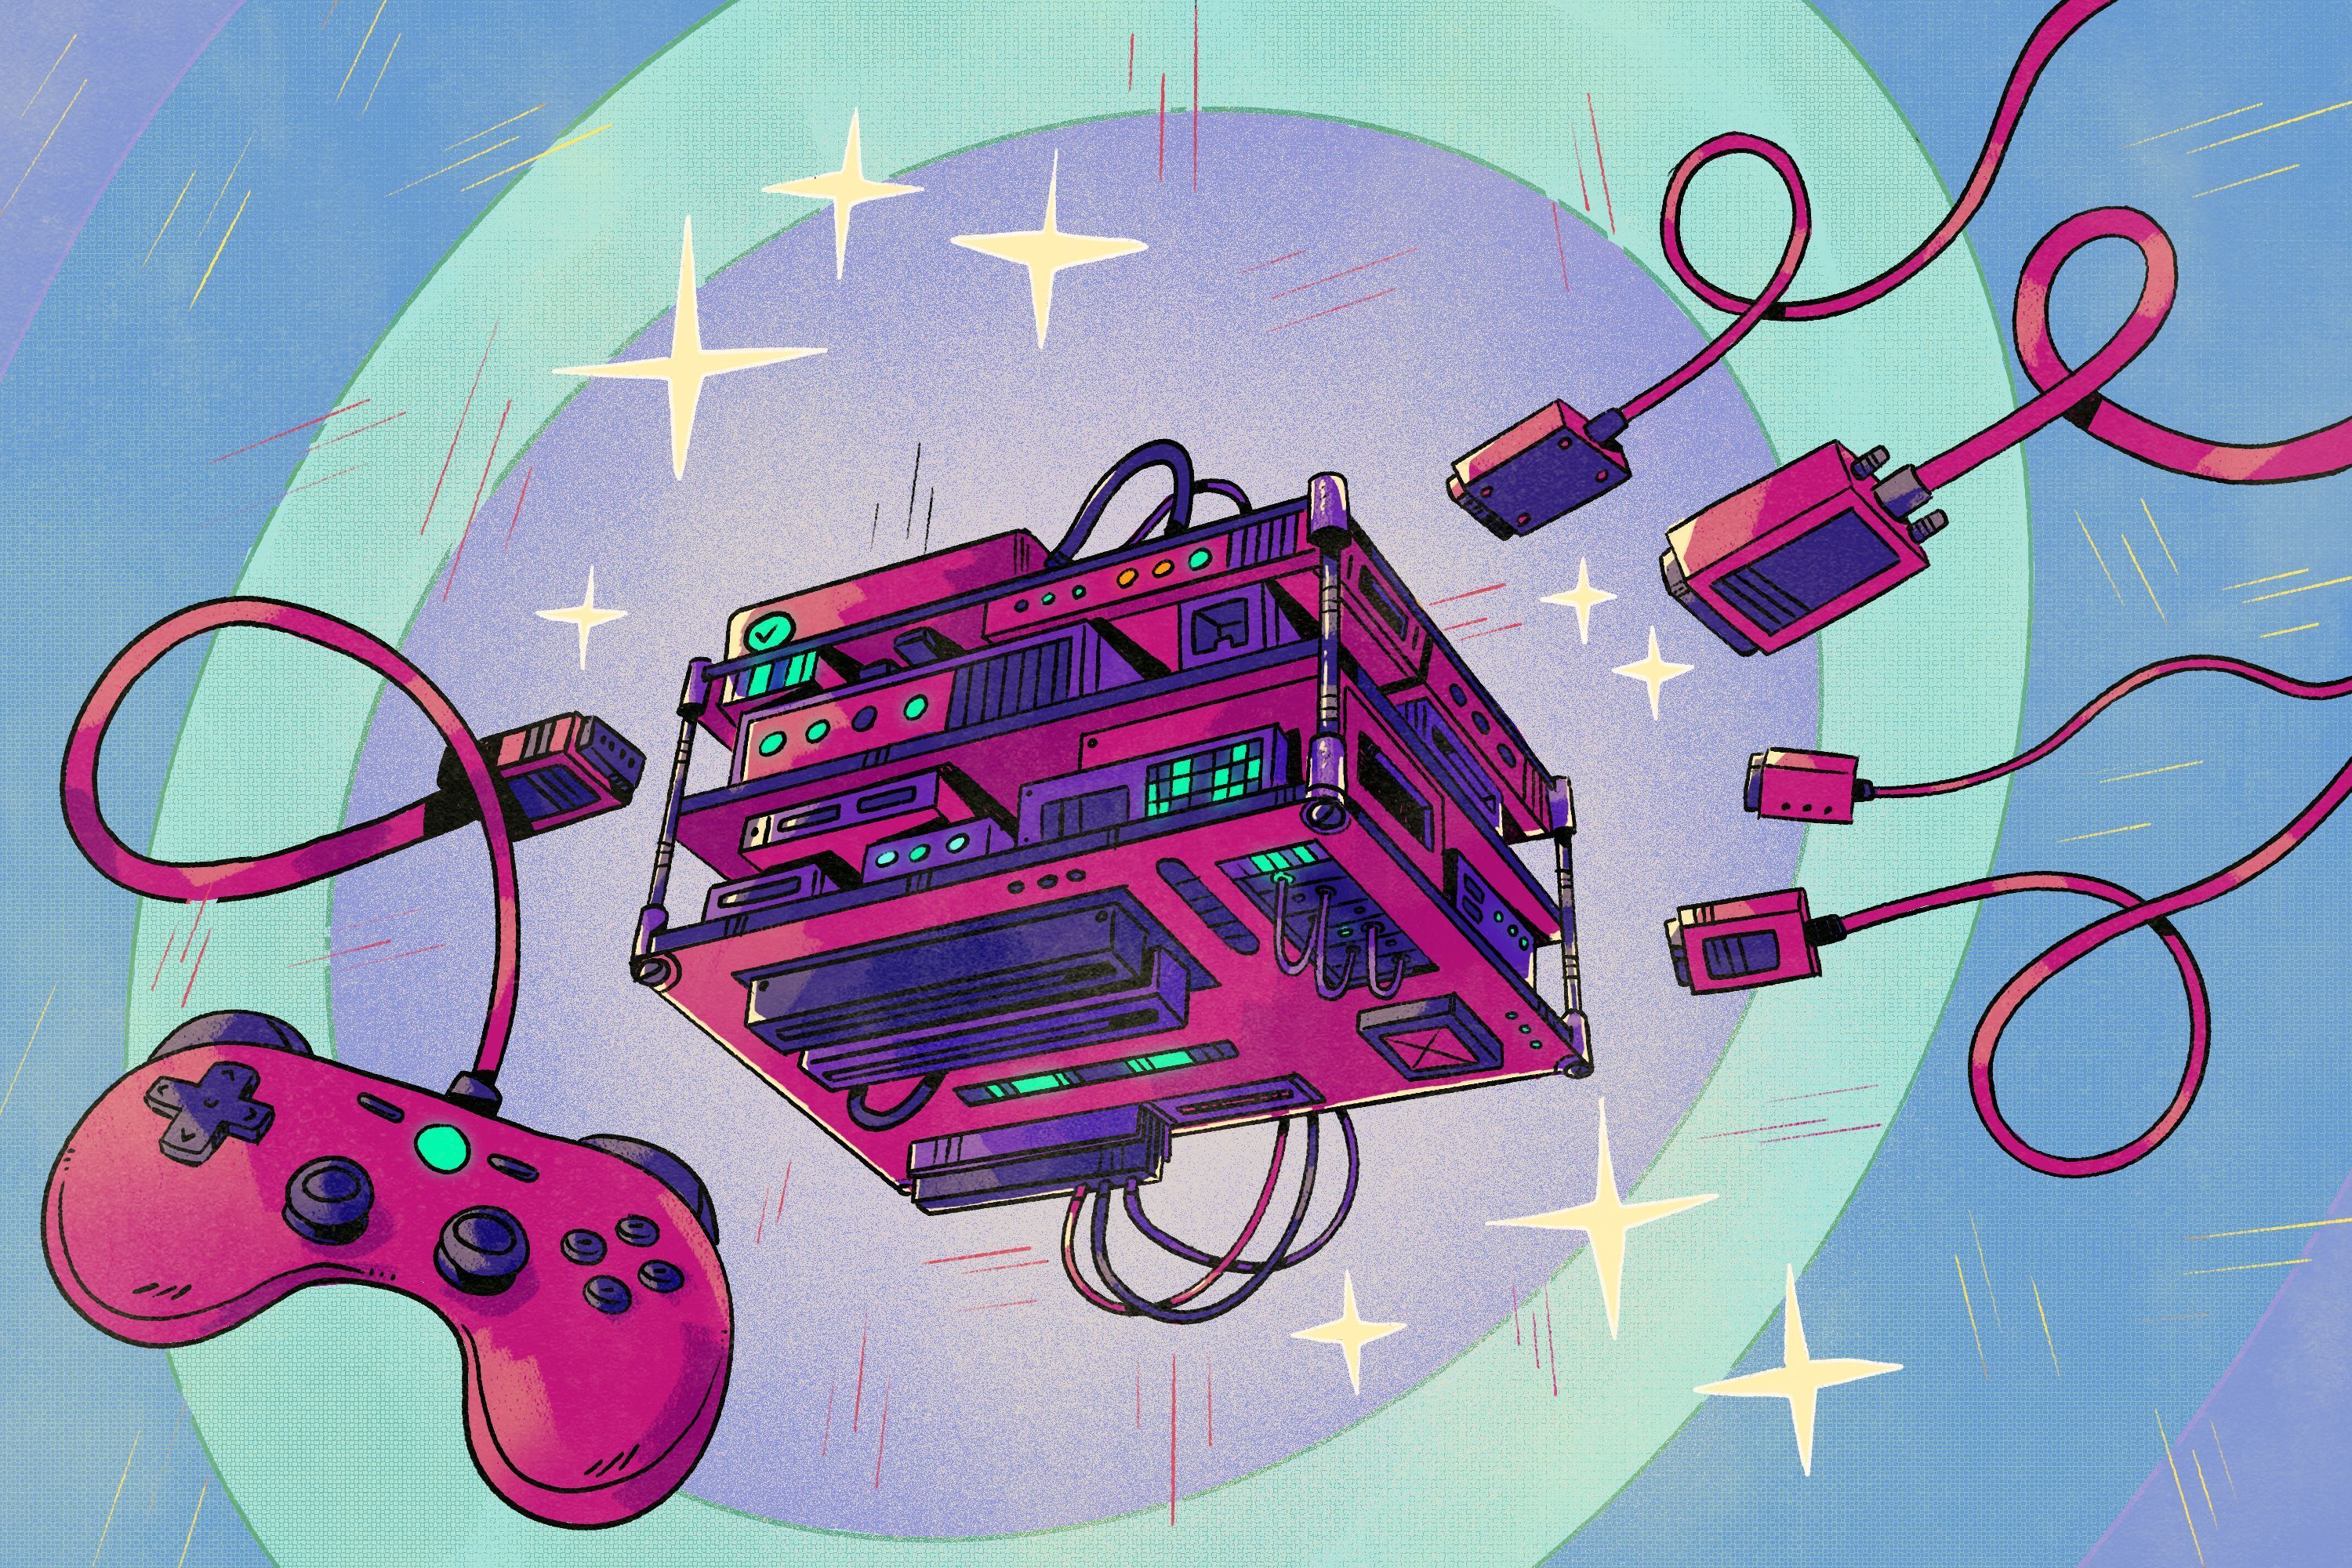 An illustration of a floating pink cube with a video game controller attached to it. - Arcade, Nintendo